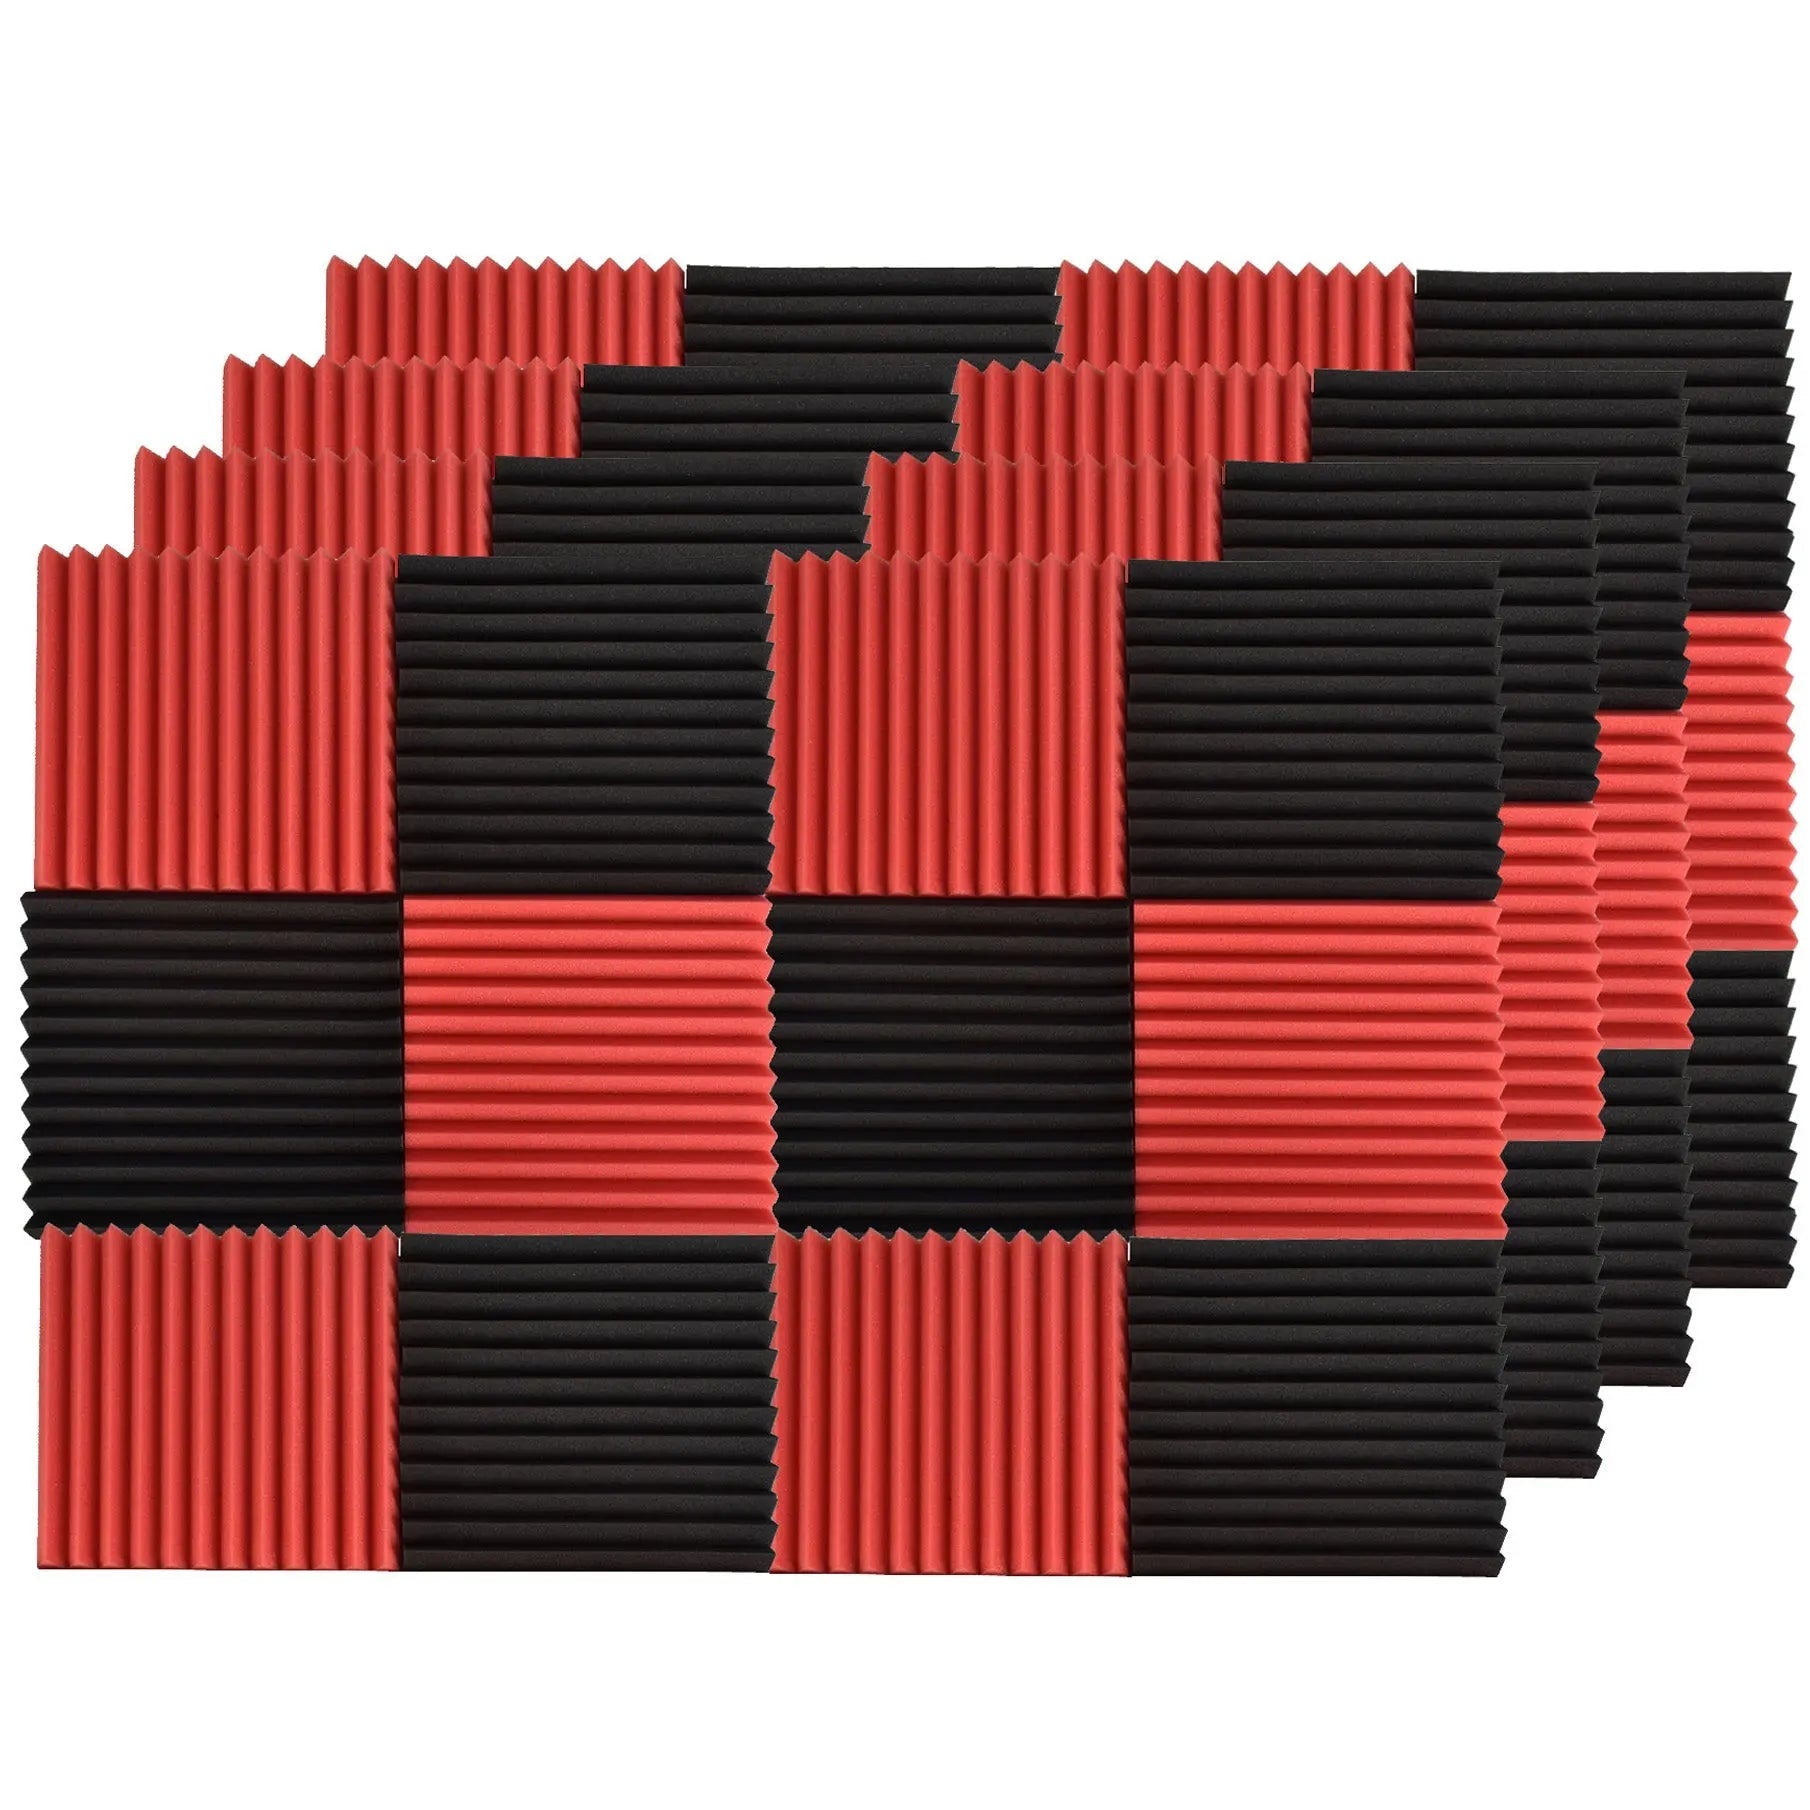 48pcs 12"×12"×1" Red/Black Acoustic Foam Panel Studio Wall Soundproofing Tiles FINDMALLPARTS